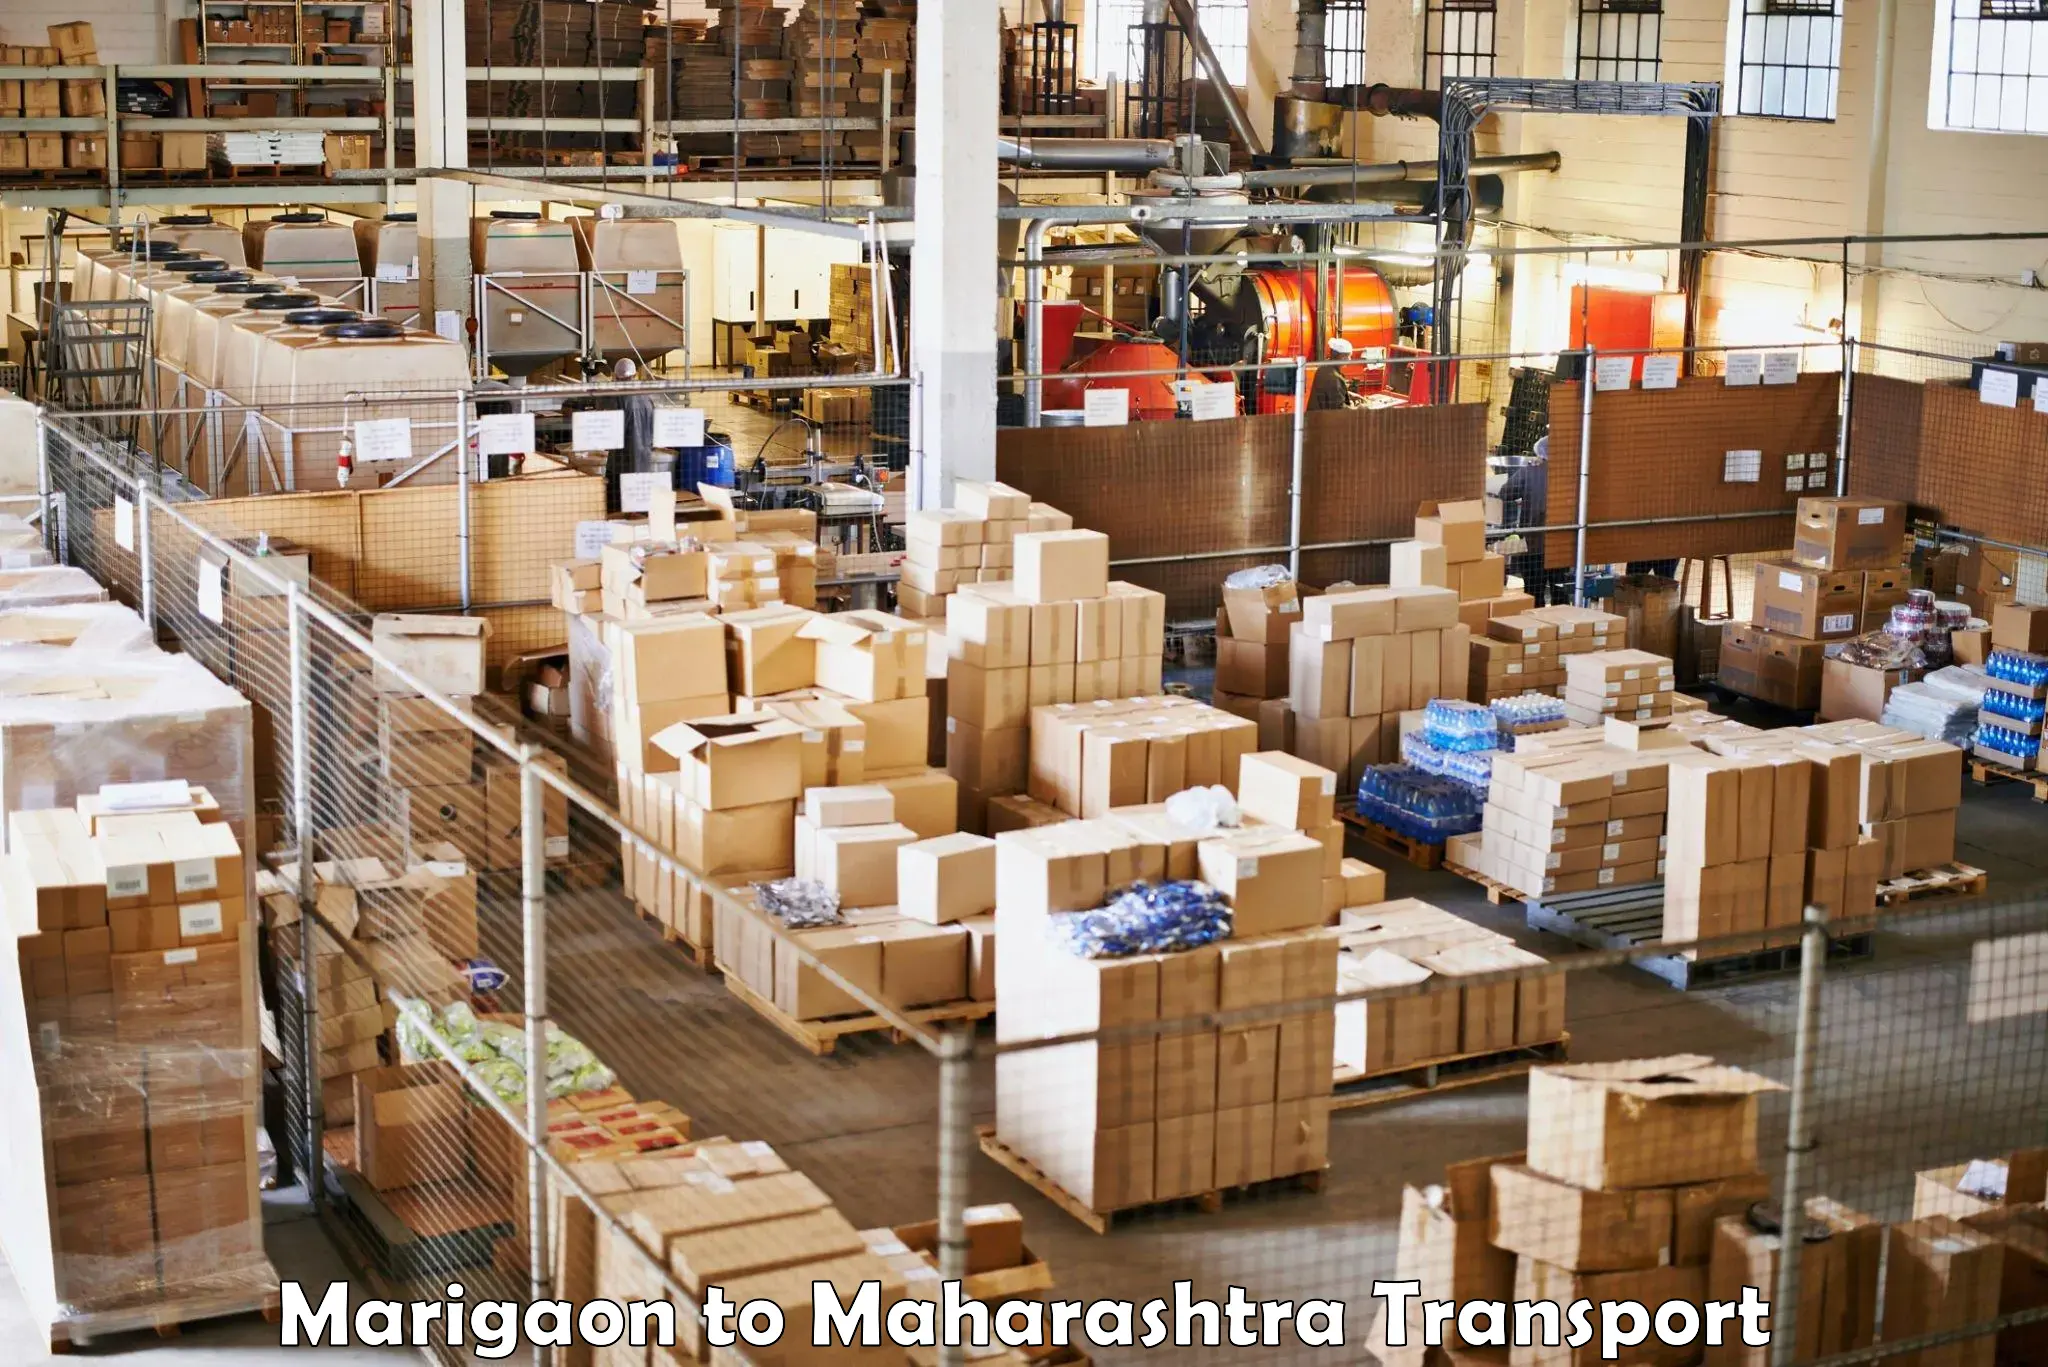 Part load transport service in India Marigaon to Dadar